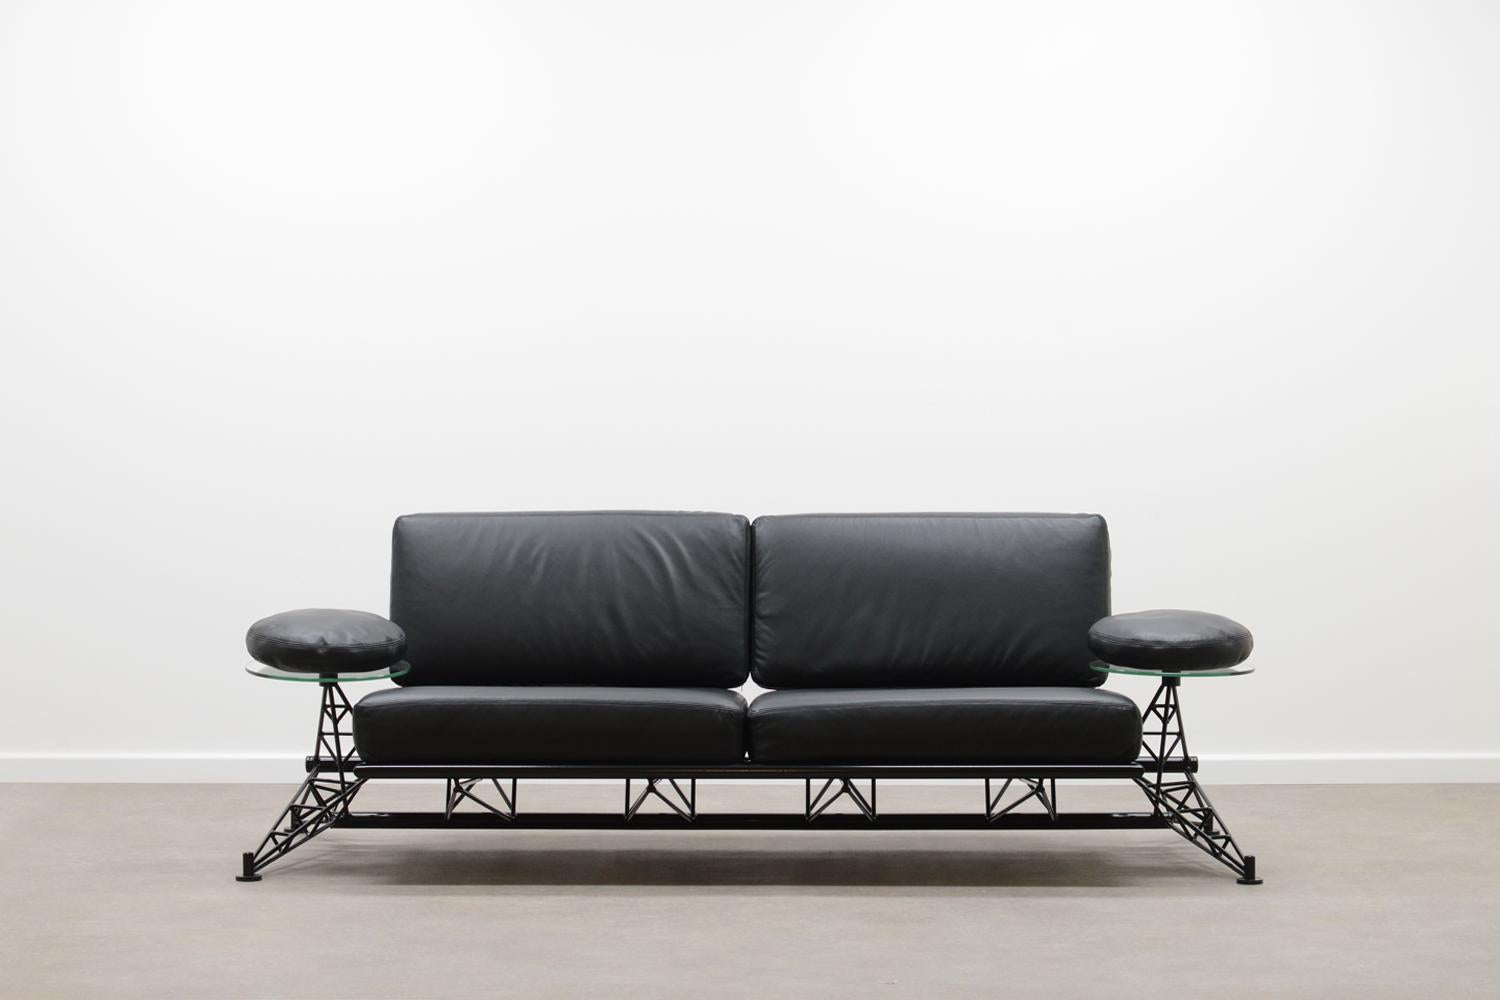 Wing sofa by Roy Fleetwood for Vitra 80’s. This is the 1st edition. Constructive metal frame, black leather cushions and glass tables / armrests. This sofa is completely restored. Frame is powder coated and reupholstered in black premium leather.